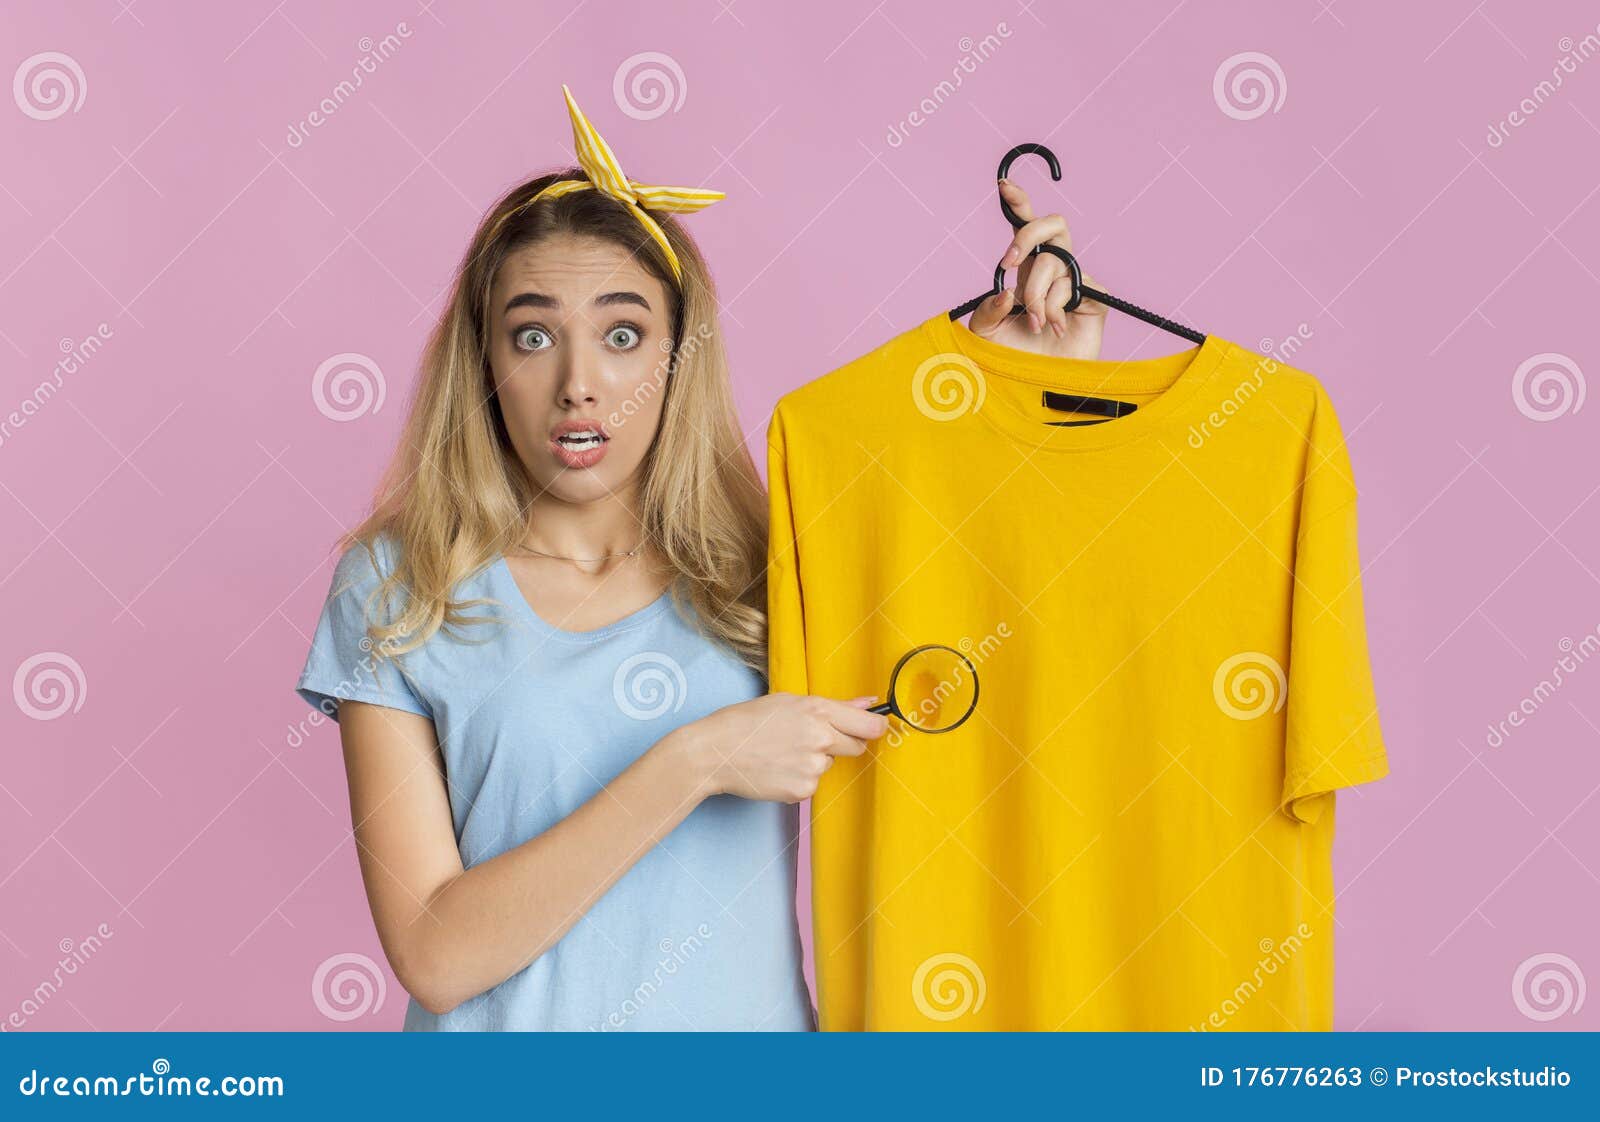 removing stains from clothing concept. housewife with magnifier